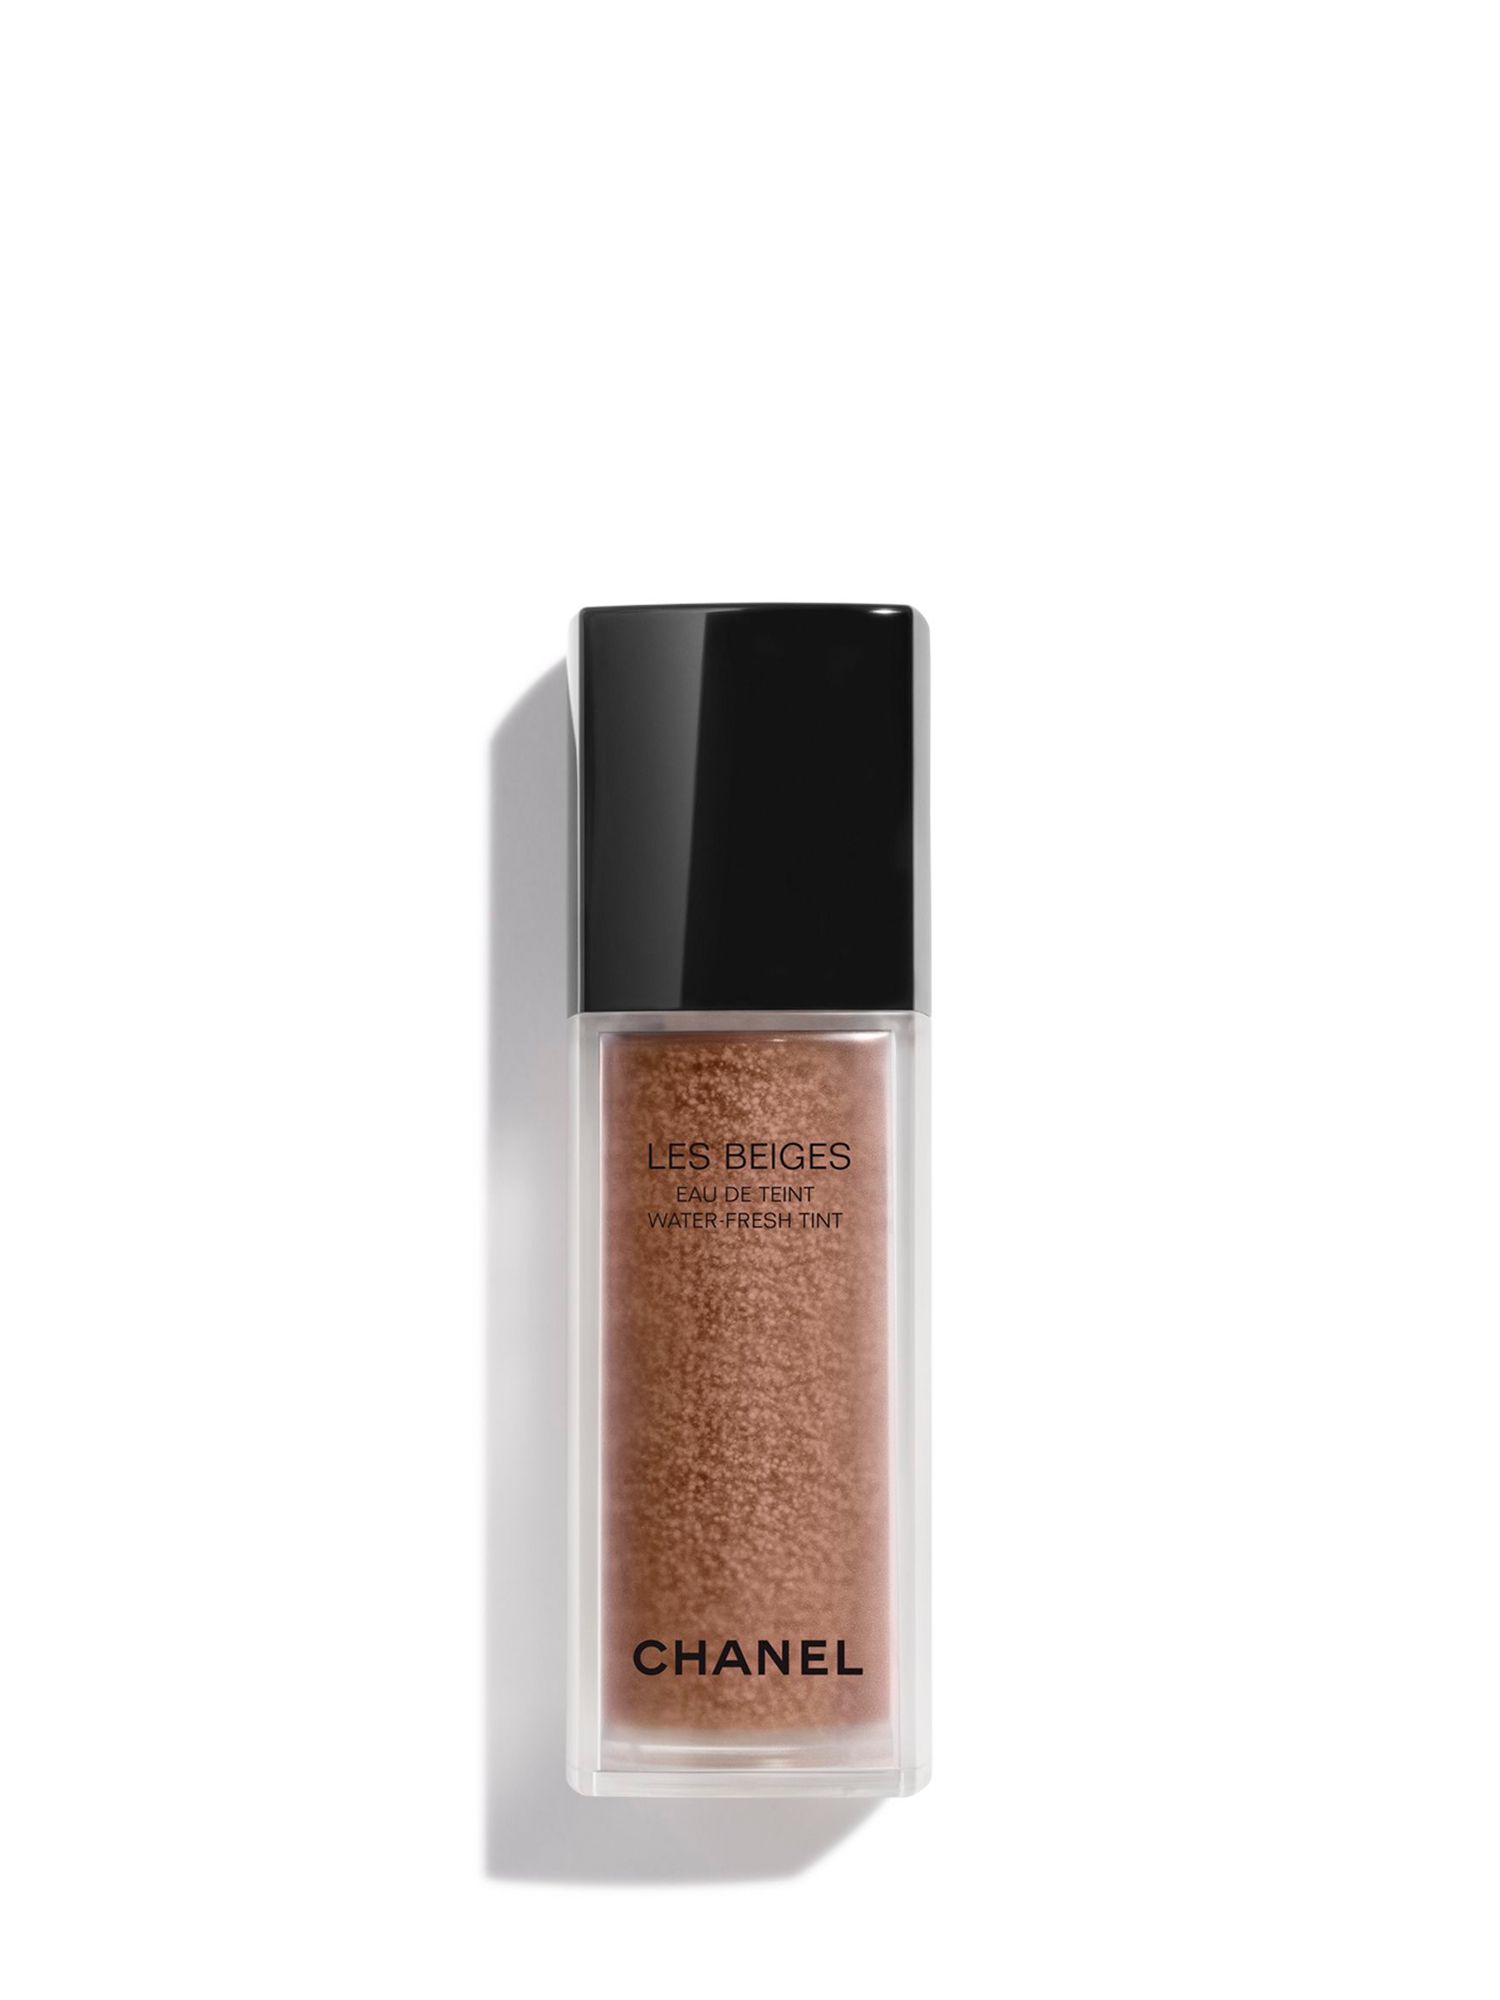 CHANEL Les Beiges Water-Fresh Tint Travel Size, Deep Plus at John Lewis  & Partners